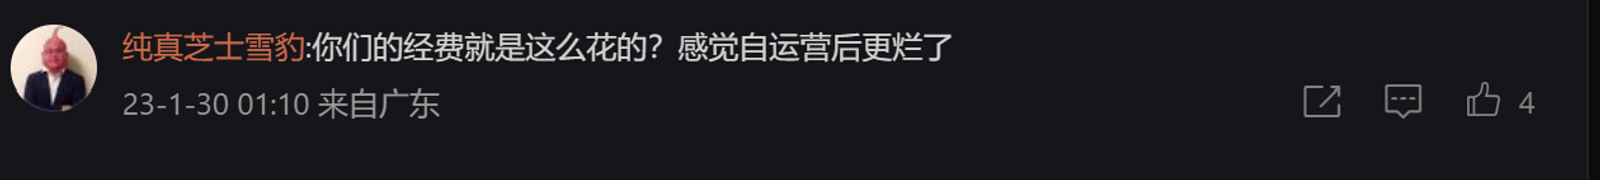 Comment on Weibo